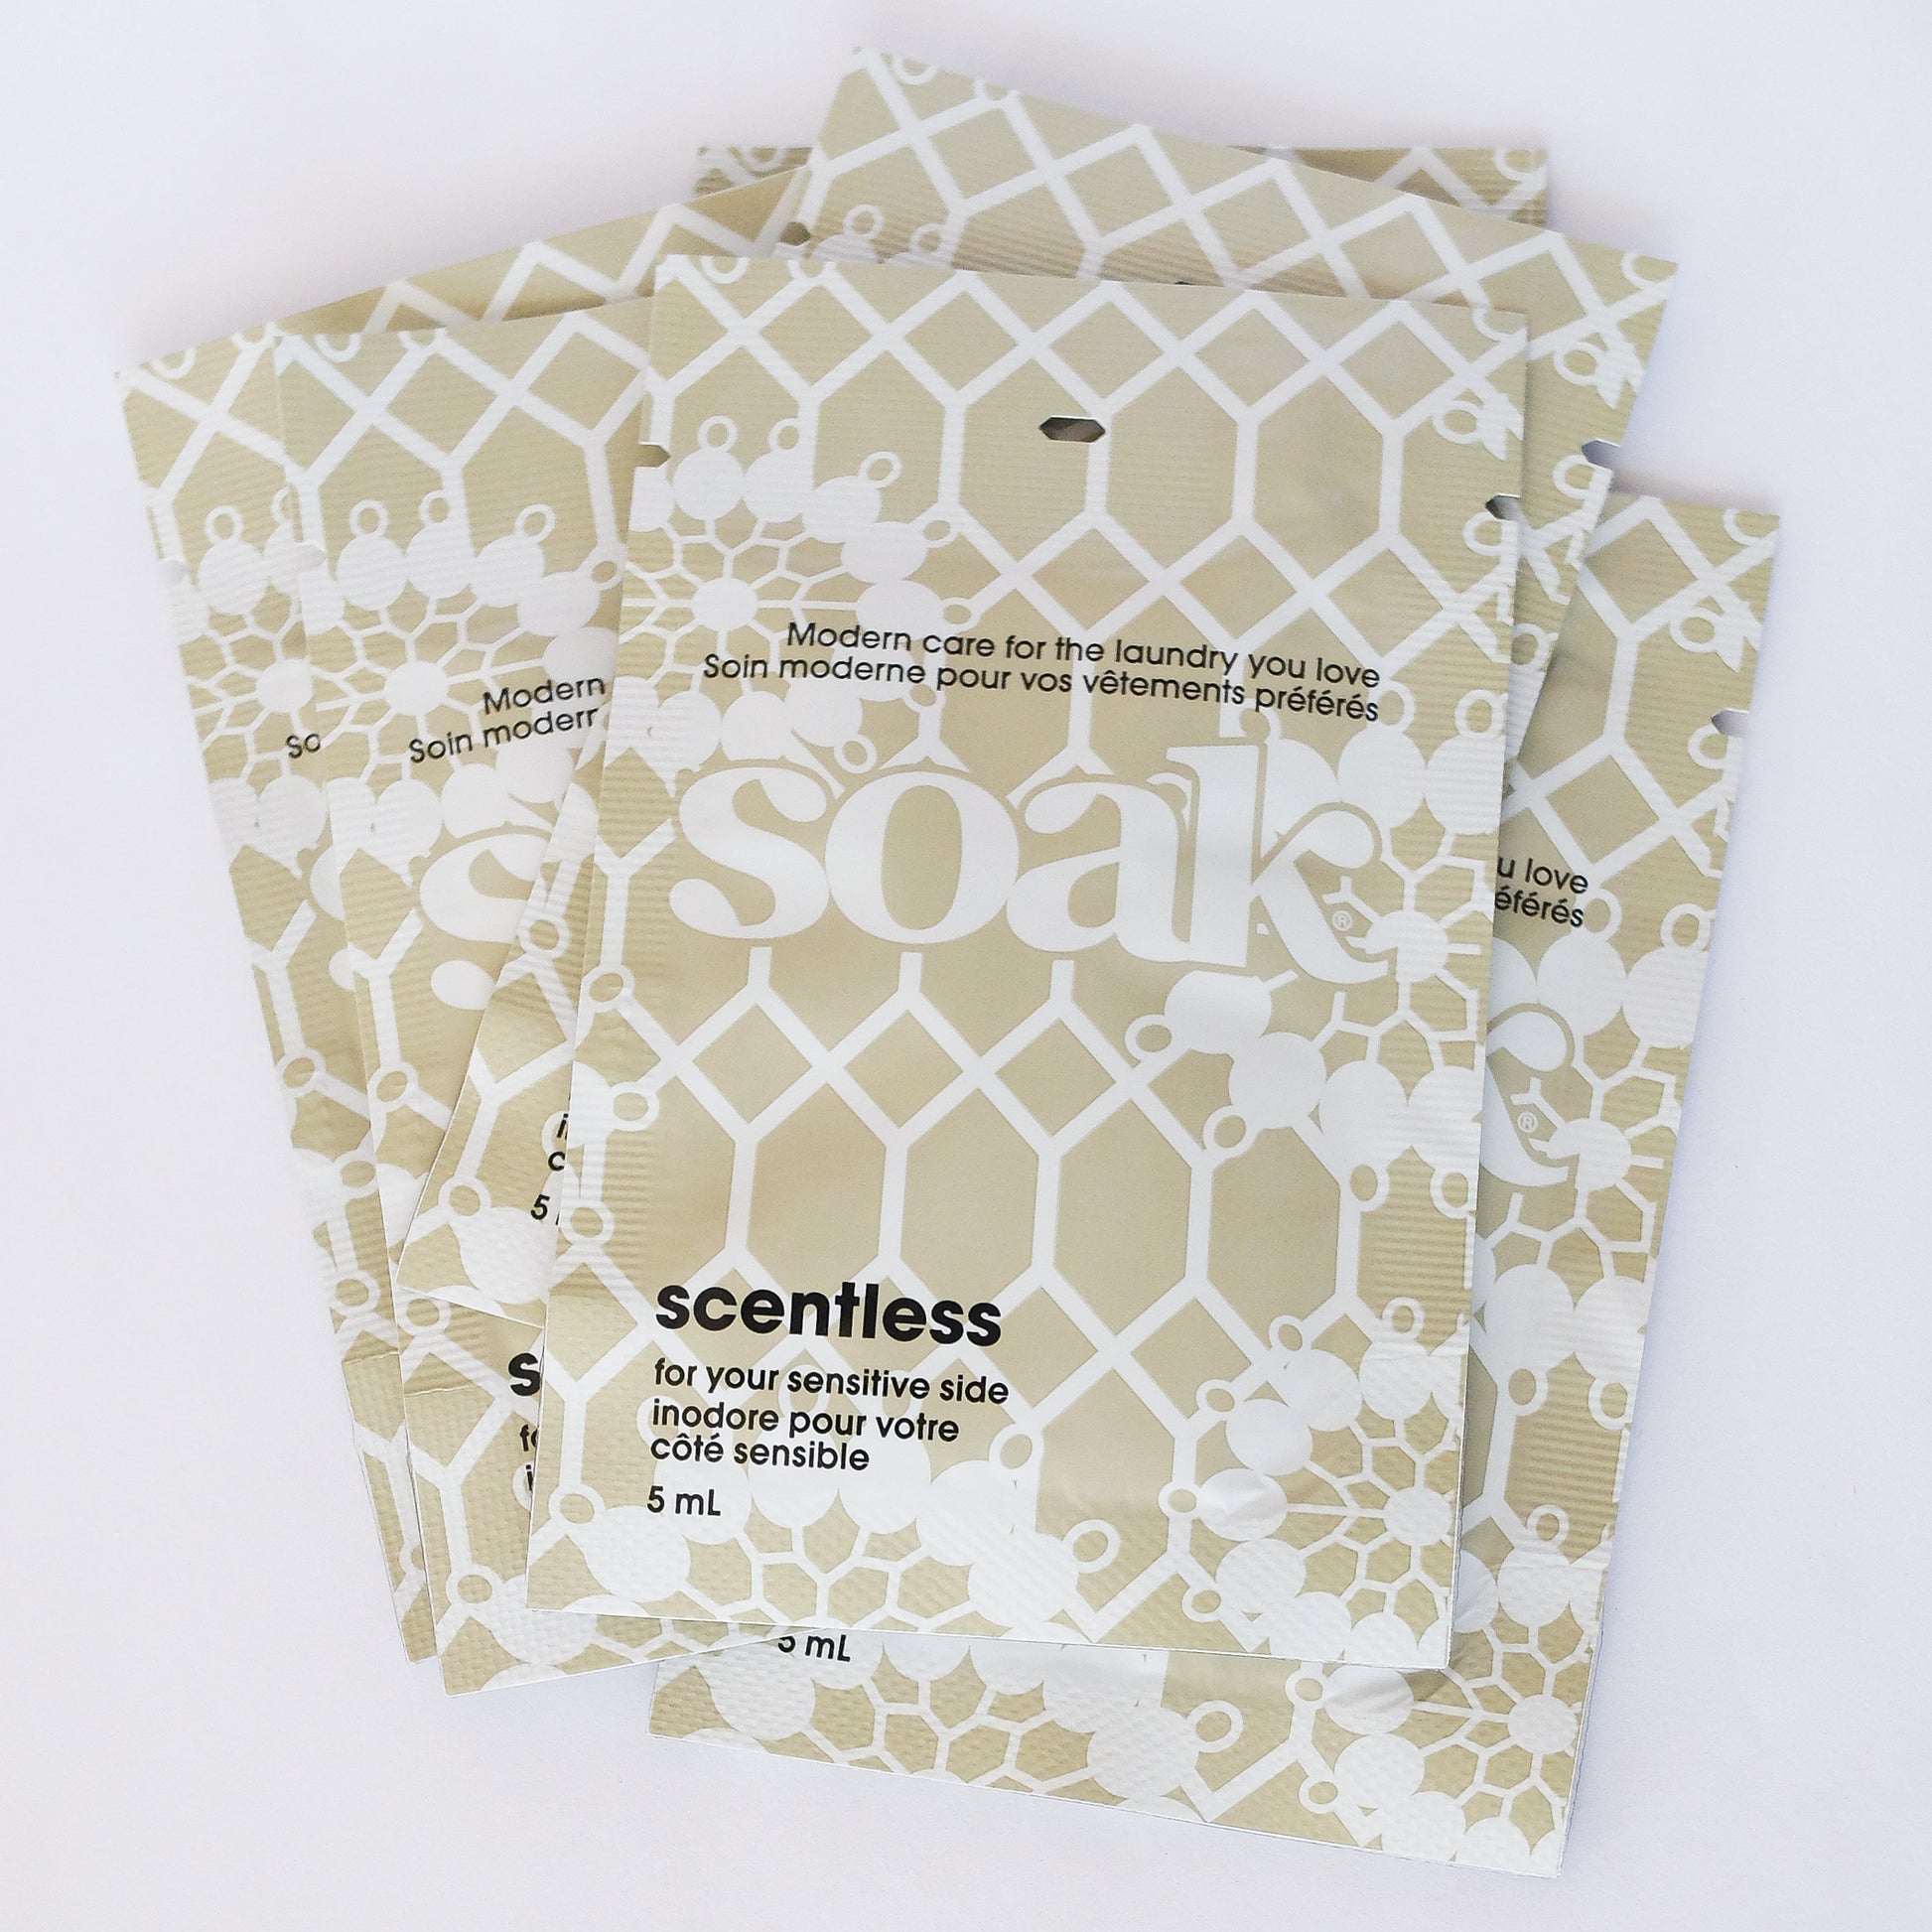 Soak Scentless single use packets